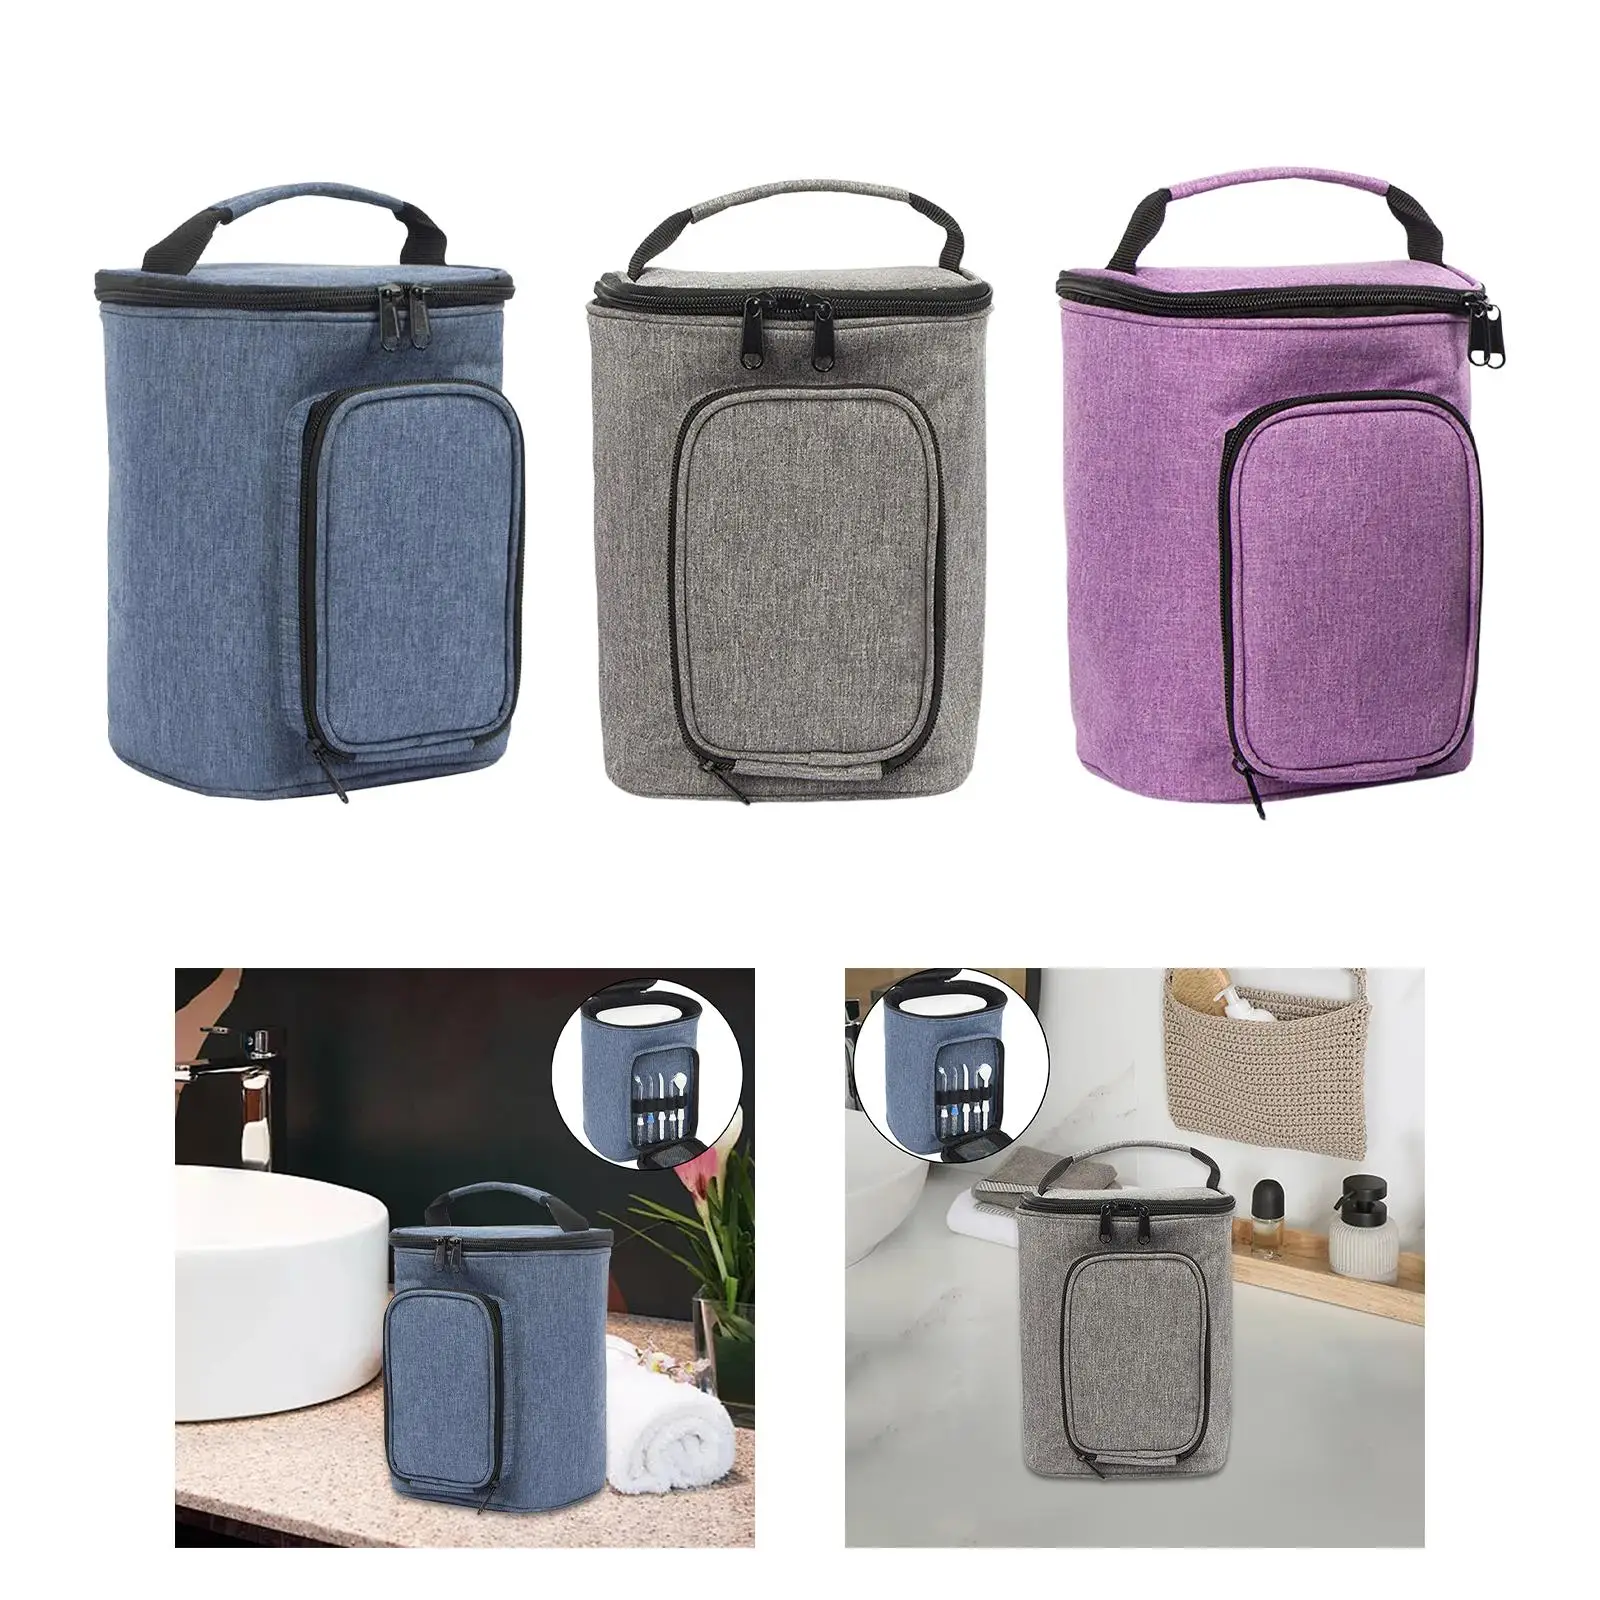 Carrying Storage Bag for Water Flosser Home Travel Use Accessories Lightweight Durable Containers Water Flosser Storage Bag